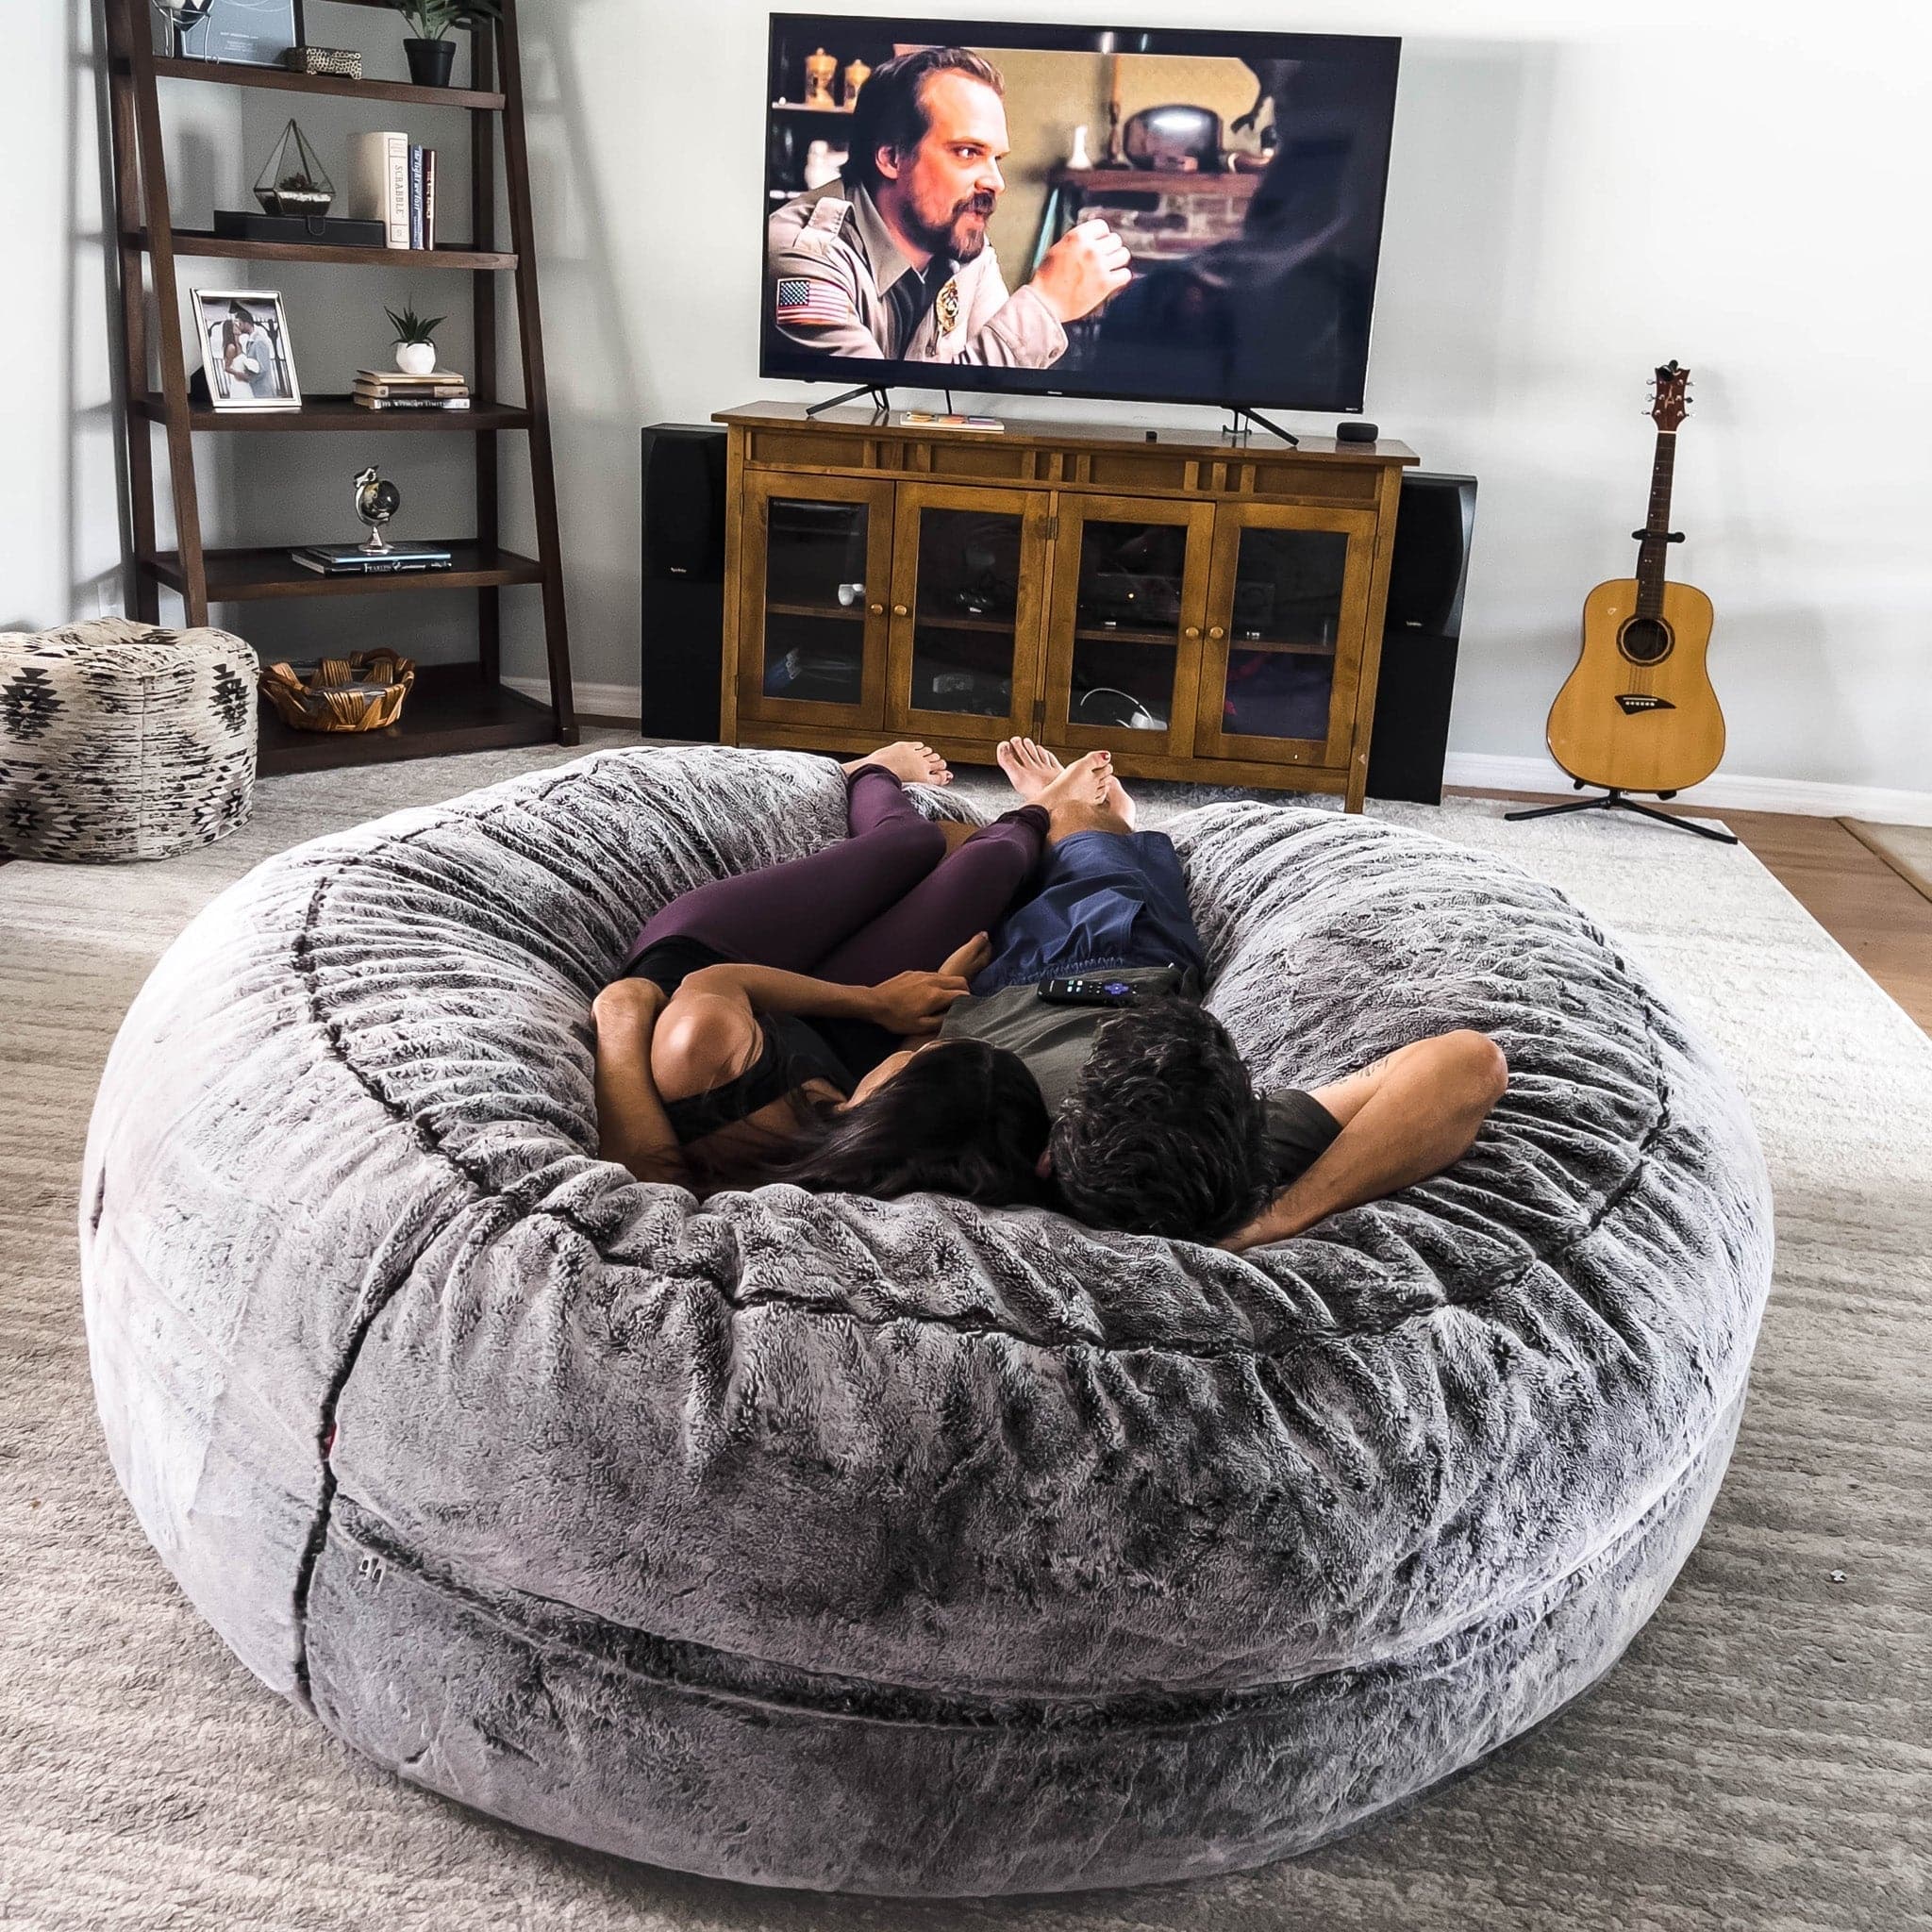  Bean Bag Chairs for Adults Bean Bag Covers Only 7ft Soft Beanbag  Giant Fur Bean Bag Chair for Adult Furniture (It was Only A Cover, Not A  Full Bean Bags) 